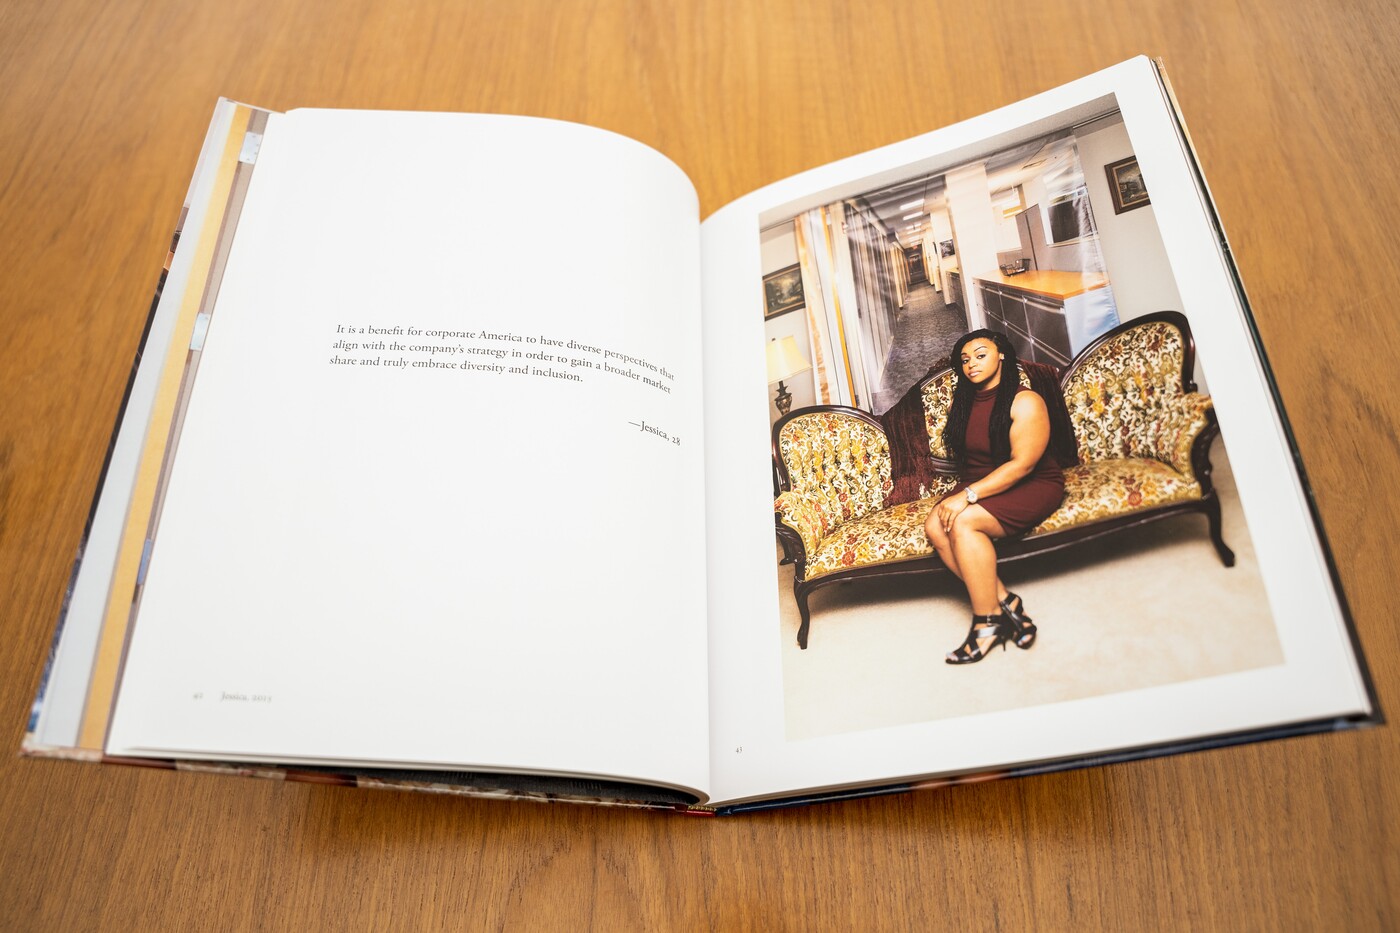 An open book lays on a wood table; the left page is white with three lines of text in the center (too small to read); the right page contains a full page photo of a medium-brown skinned woman sitting elegantly on a Victorian style couch